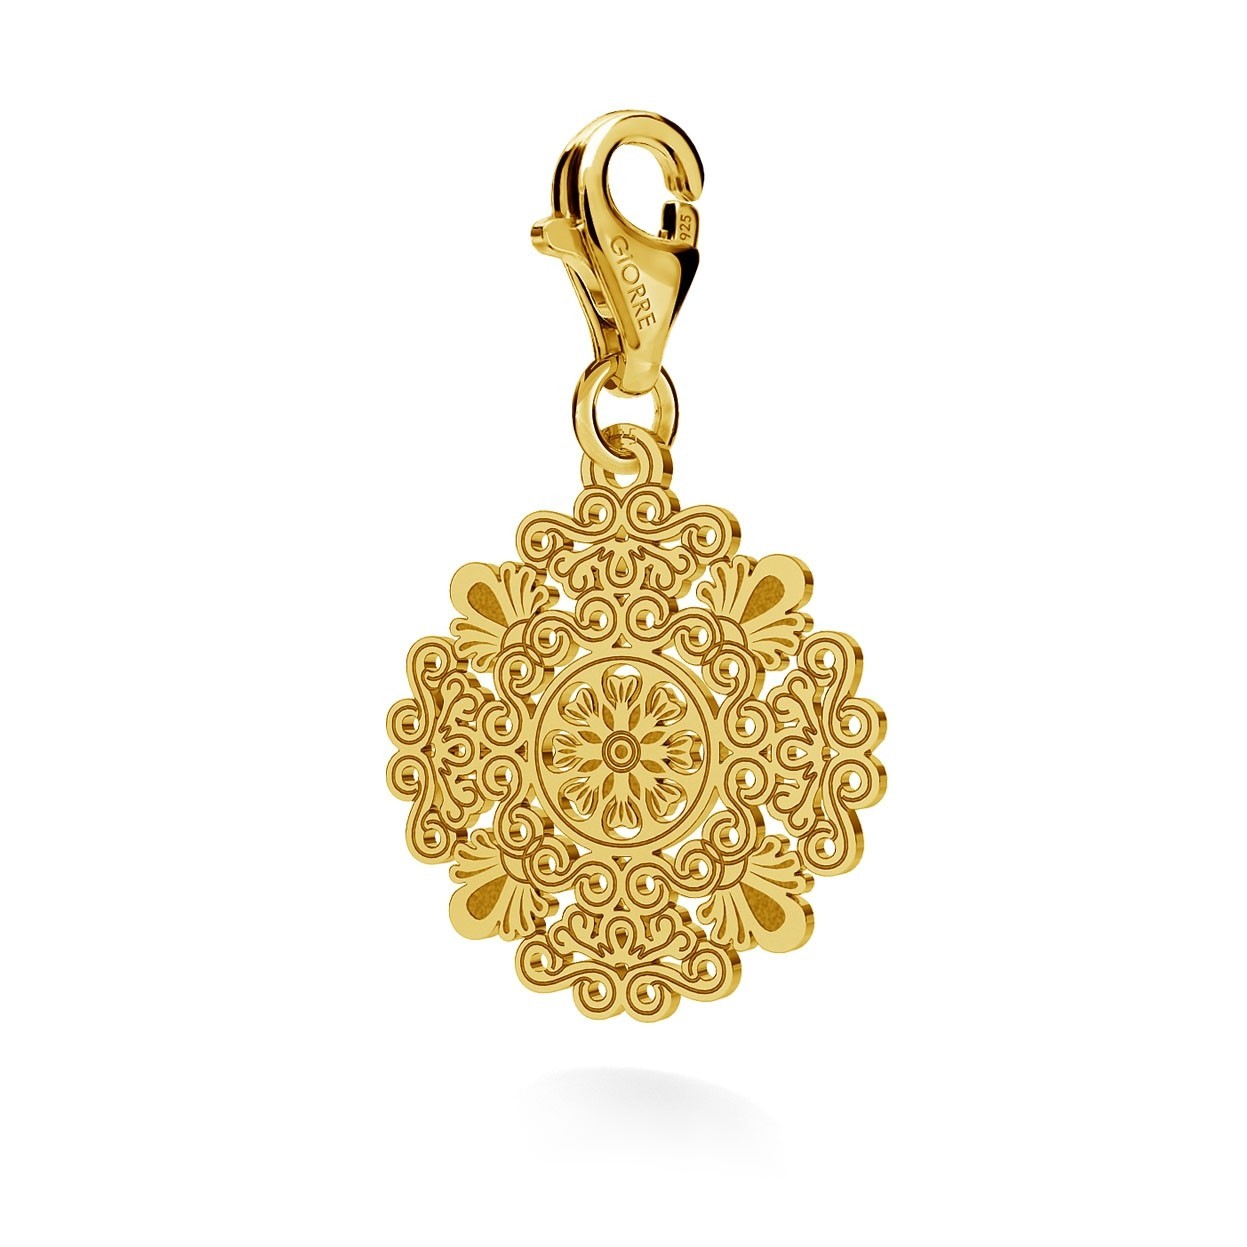 CHARM 105, OPENWORK BOHO ROSETTE, STERLING SILVER (925) RHODIUM OR GOLD PLATED